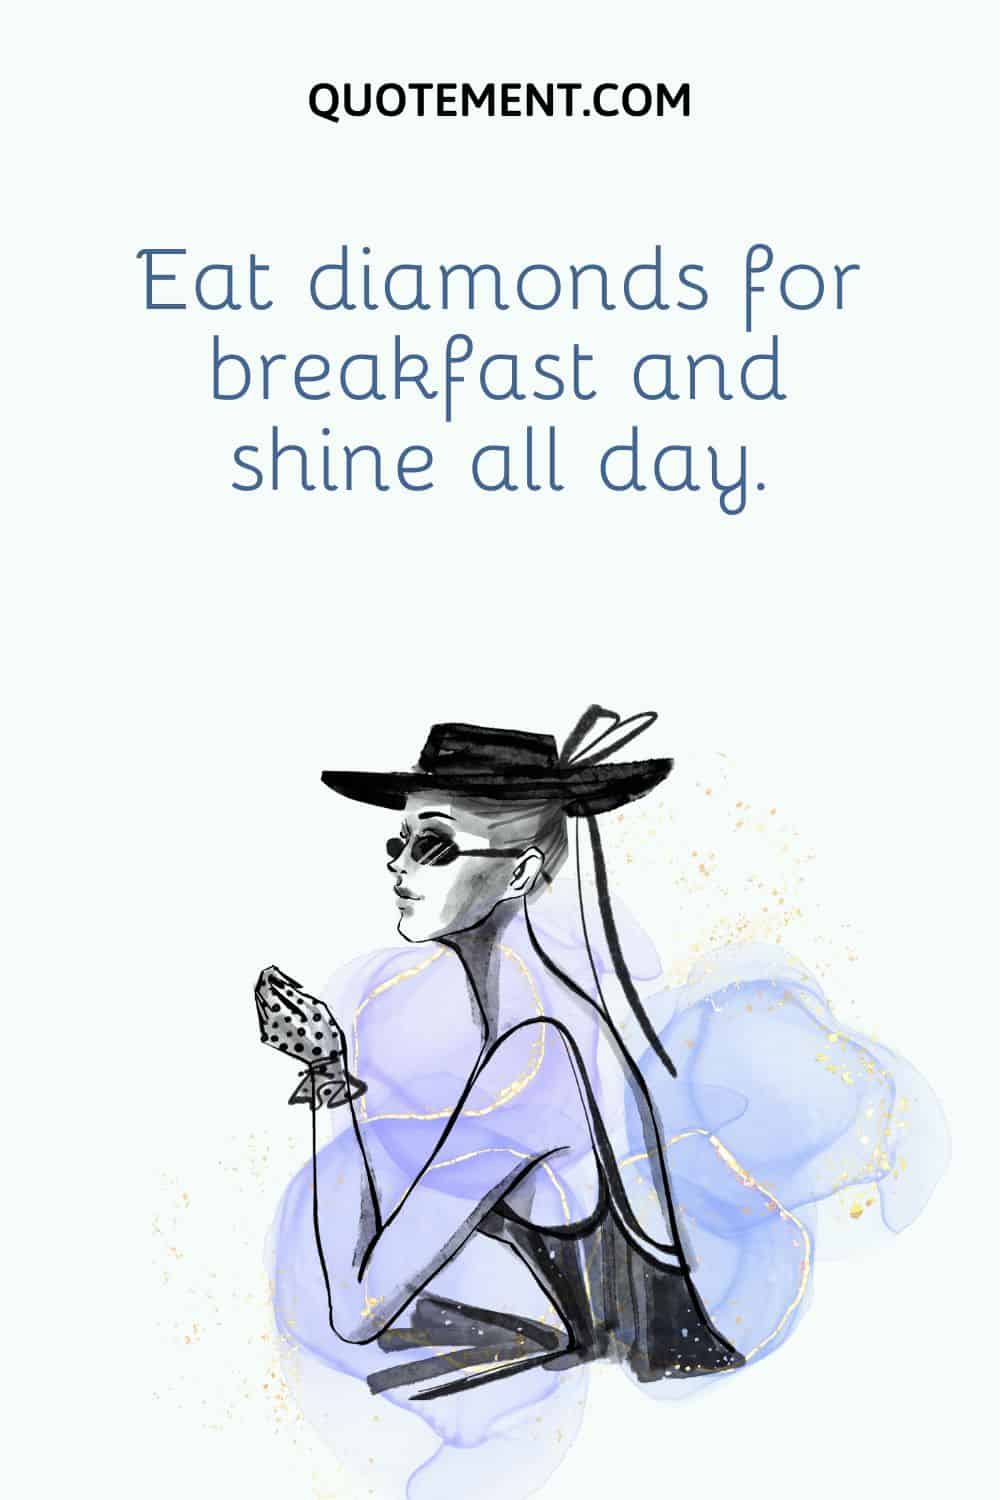 Eat diamonds for breakfast and shine all day